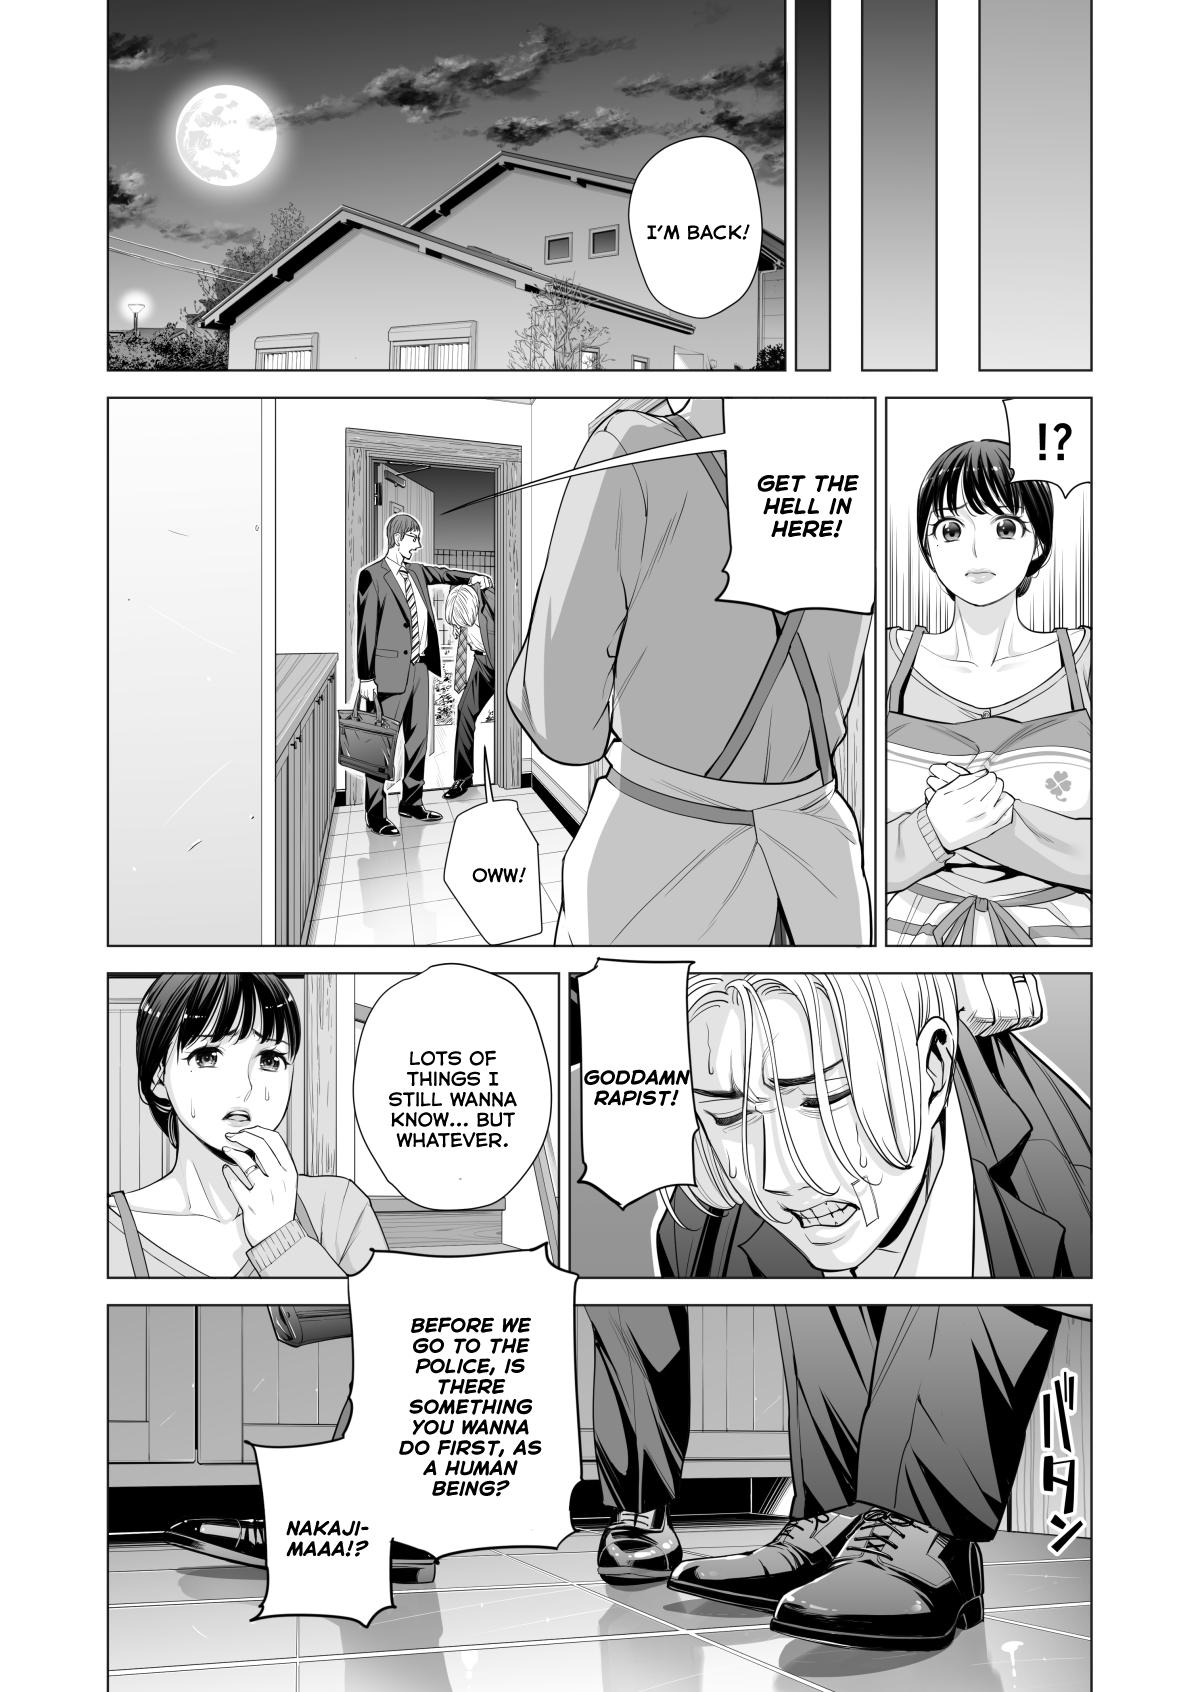 [HGT Lab (Tsusauto)] Tsukiyo no Midare Zake (Kouhen) Moonlit Intoxication ~ A Housewife Stolen by a Coworker Besides her Blackout Drunk Husband ~ Chapter 2 [English] 25